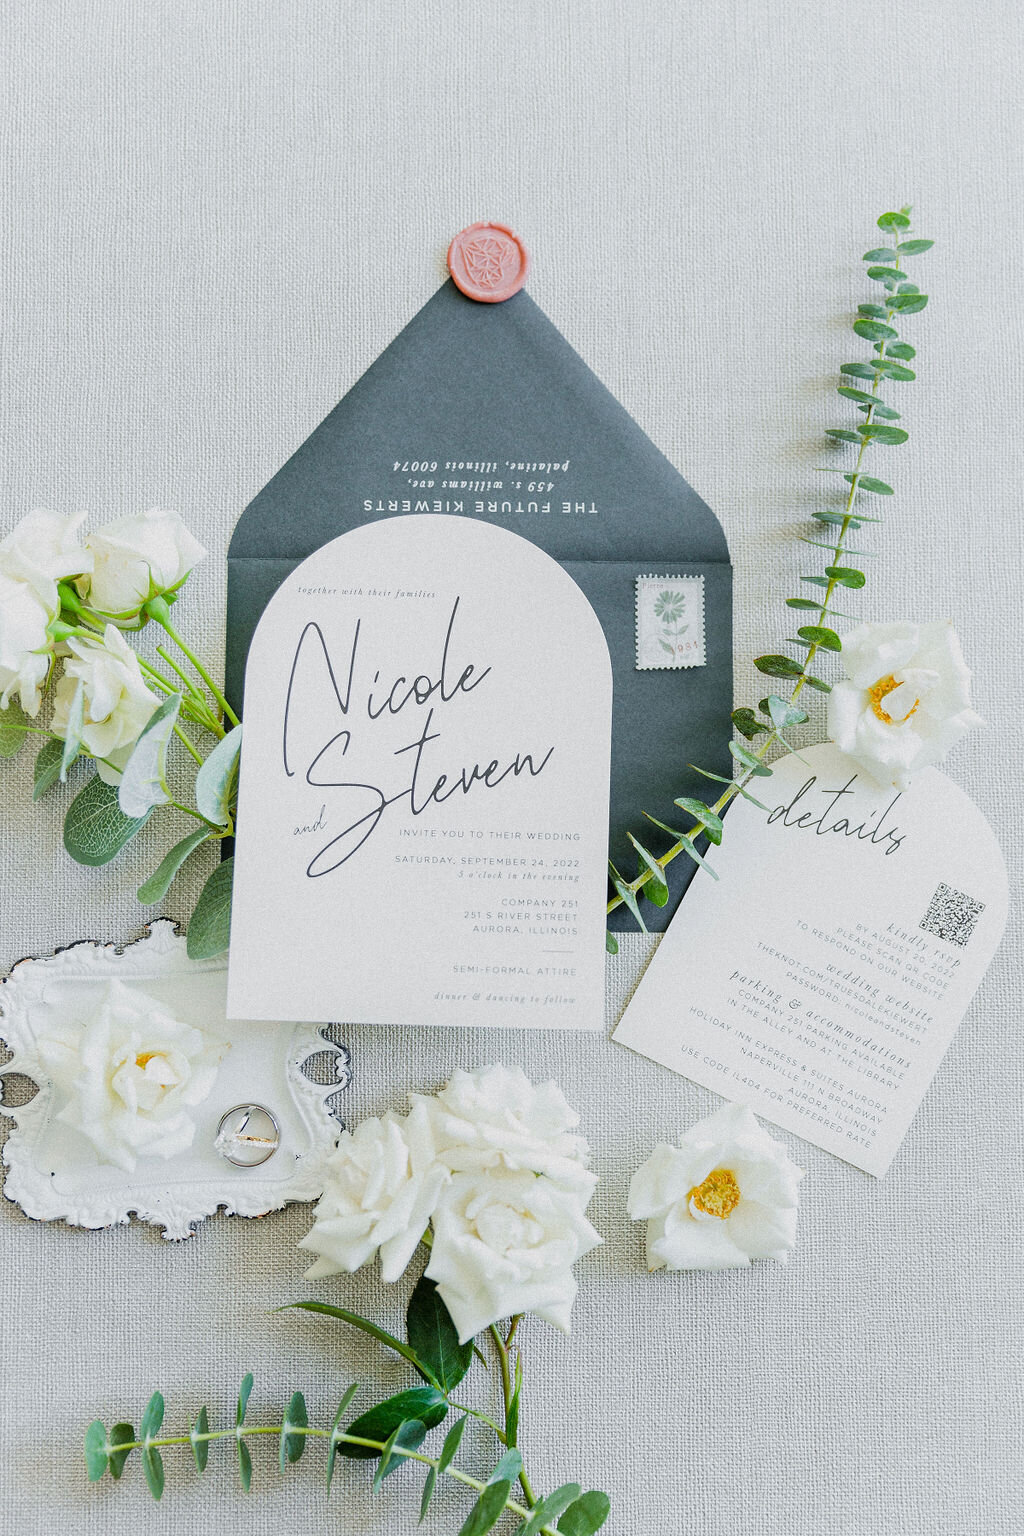 Artistic shot of wedding stationery, blending crisp white and lush green tones, showcasing the sophistication and attention to detail of the day